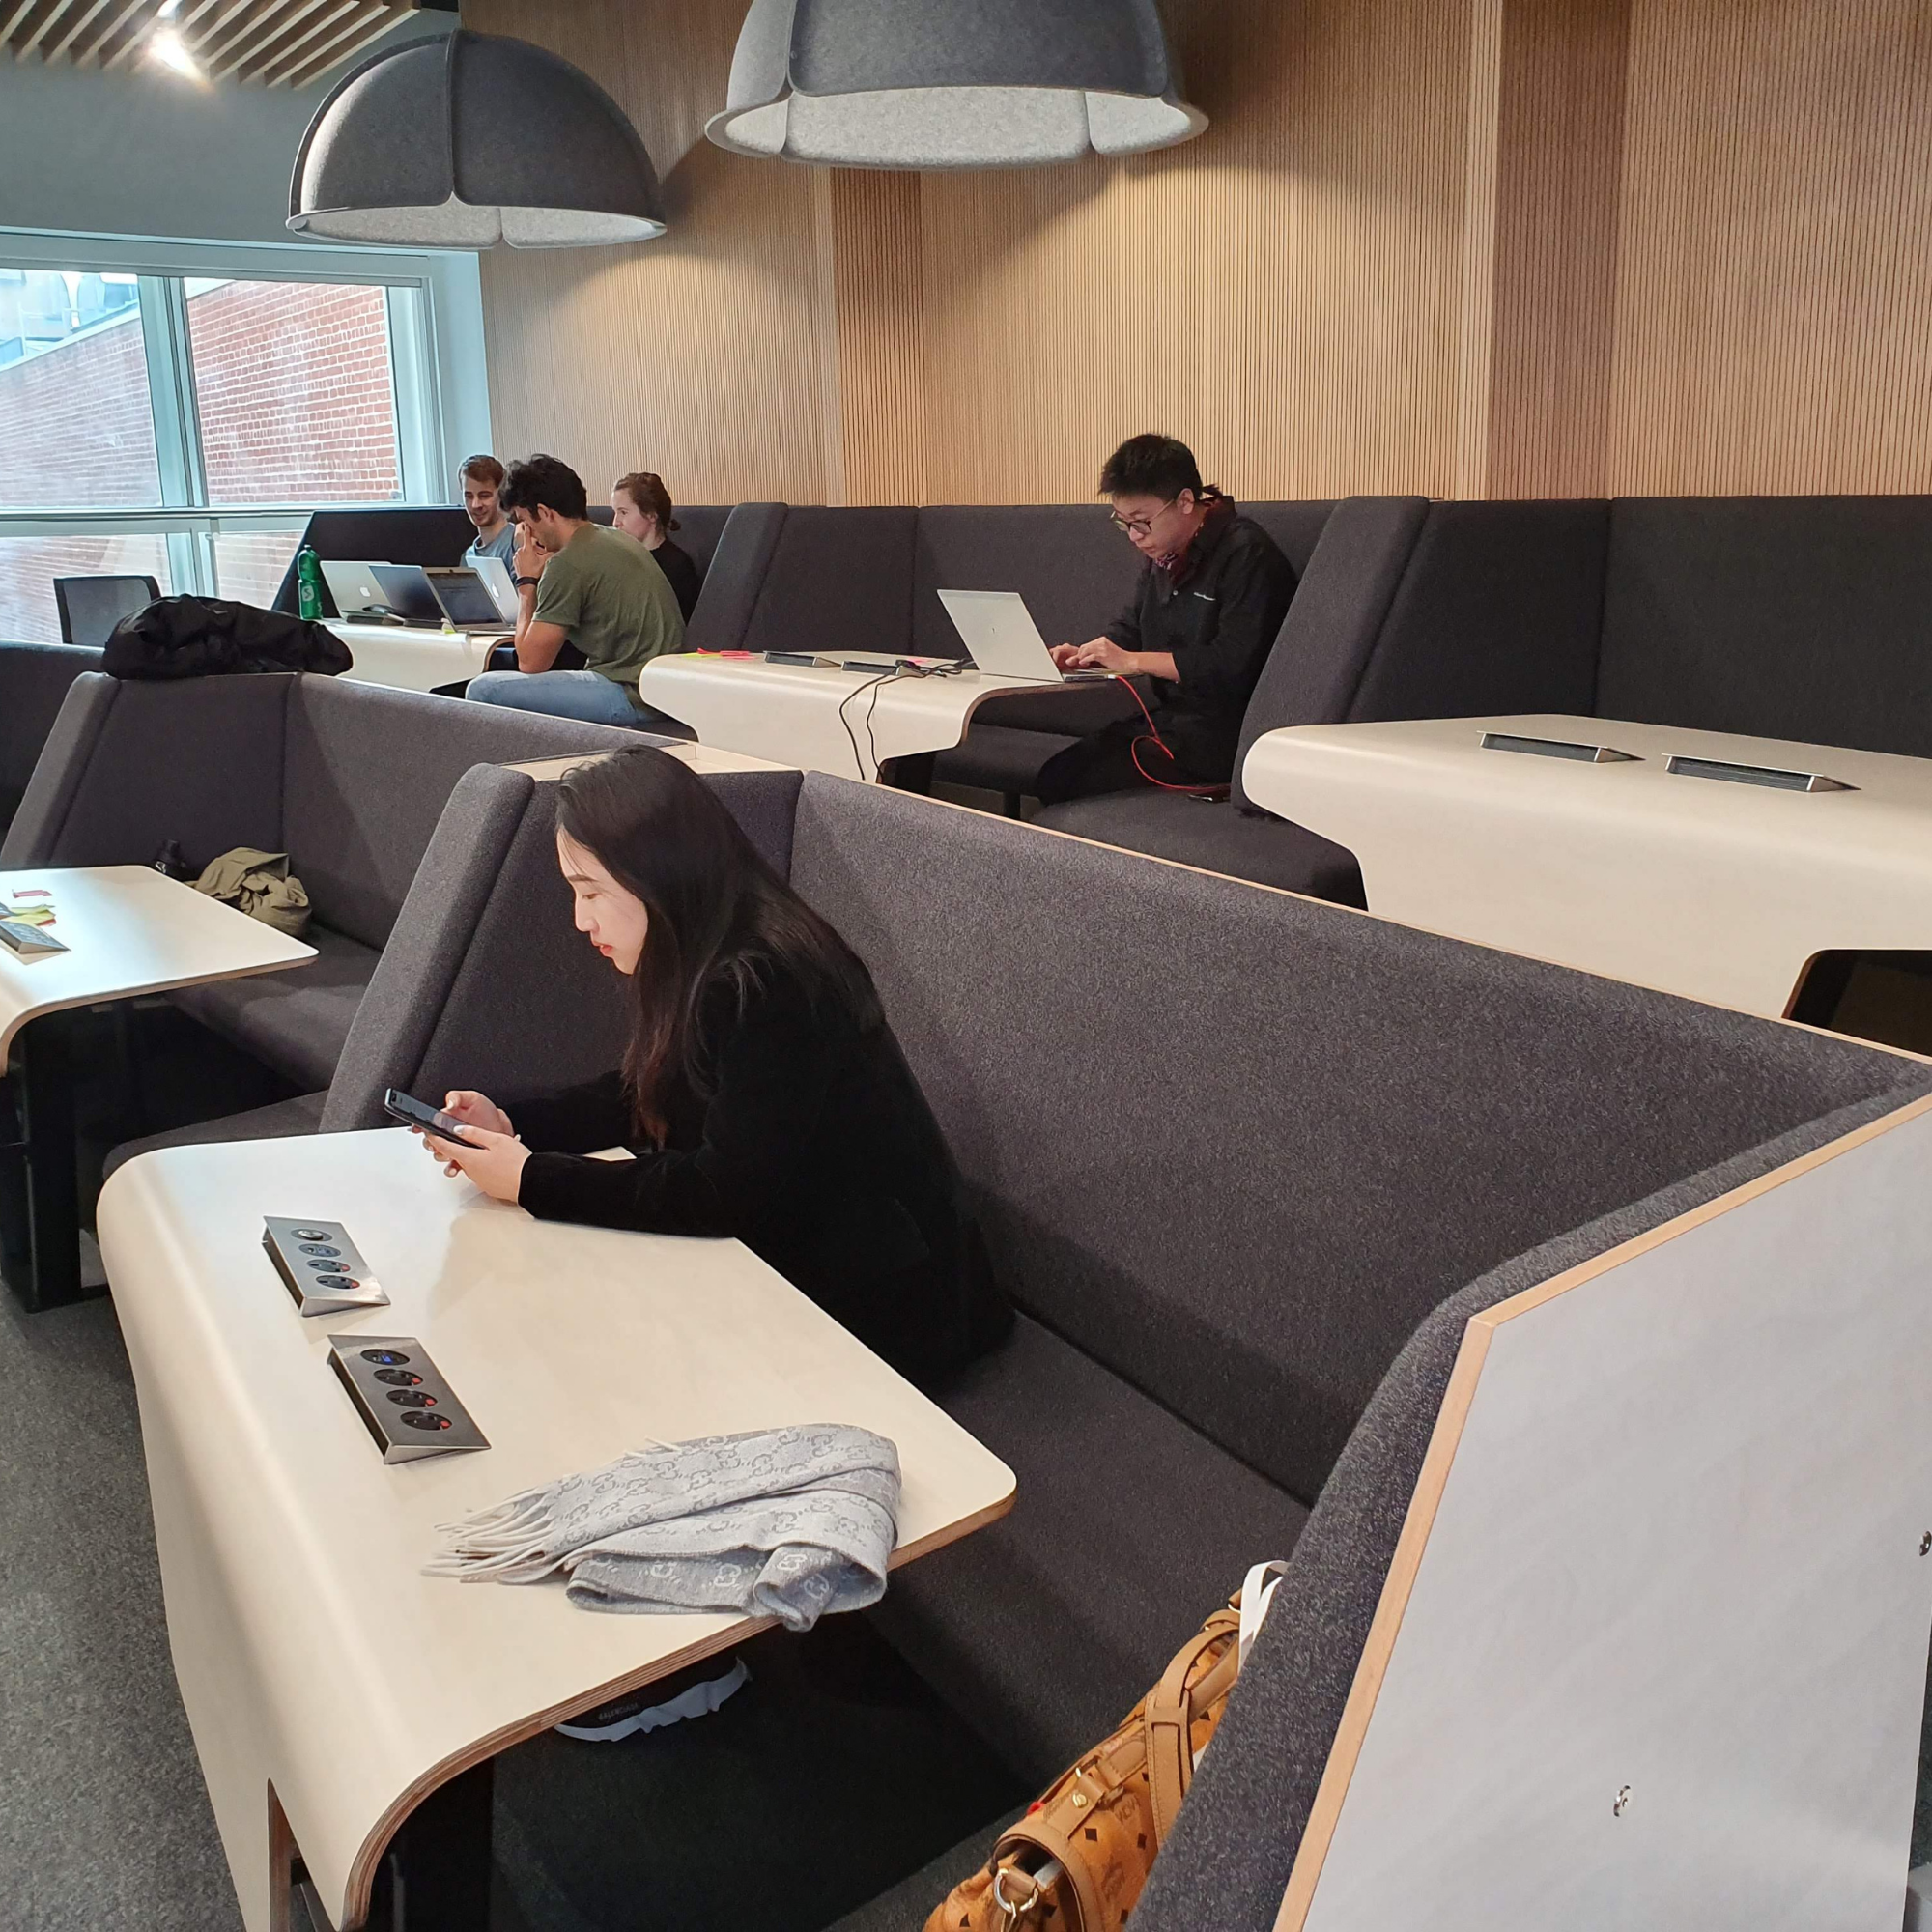 A group of people using laptops in a conference room full of work booths